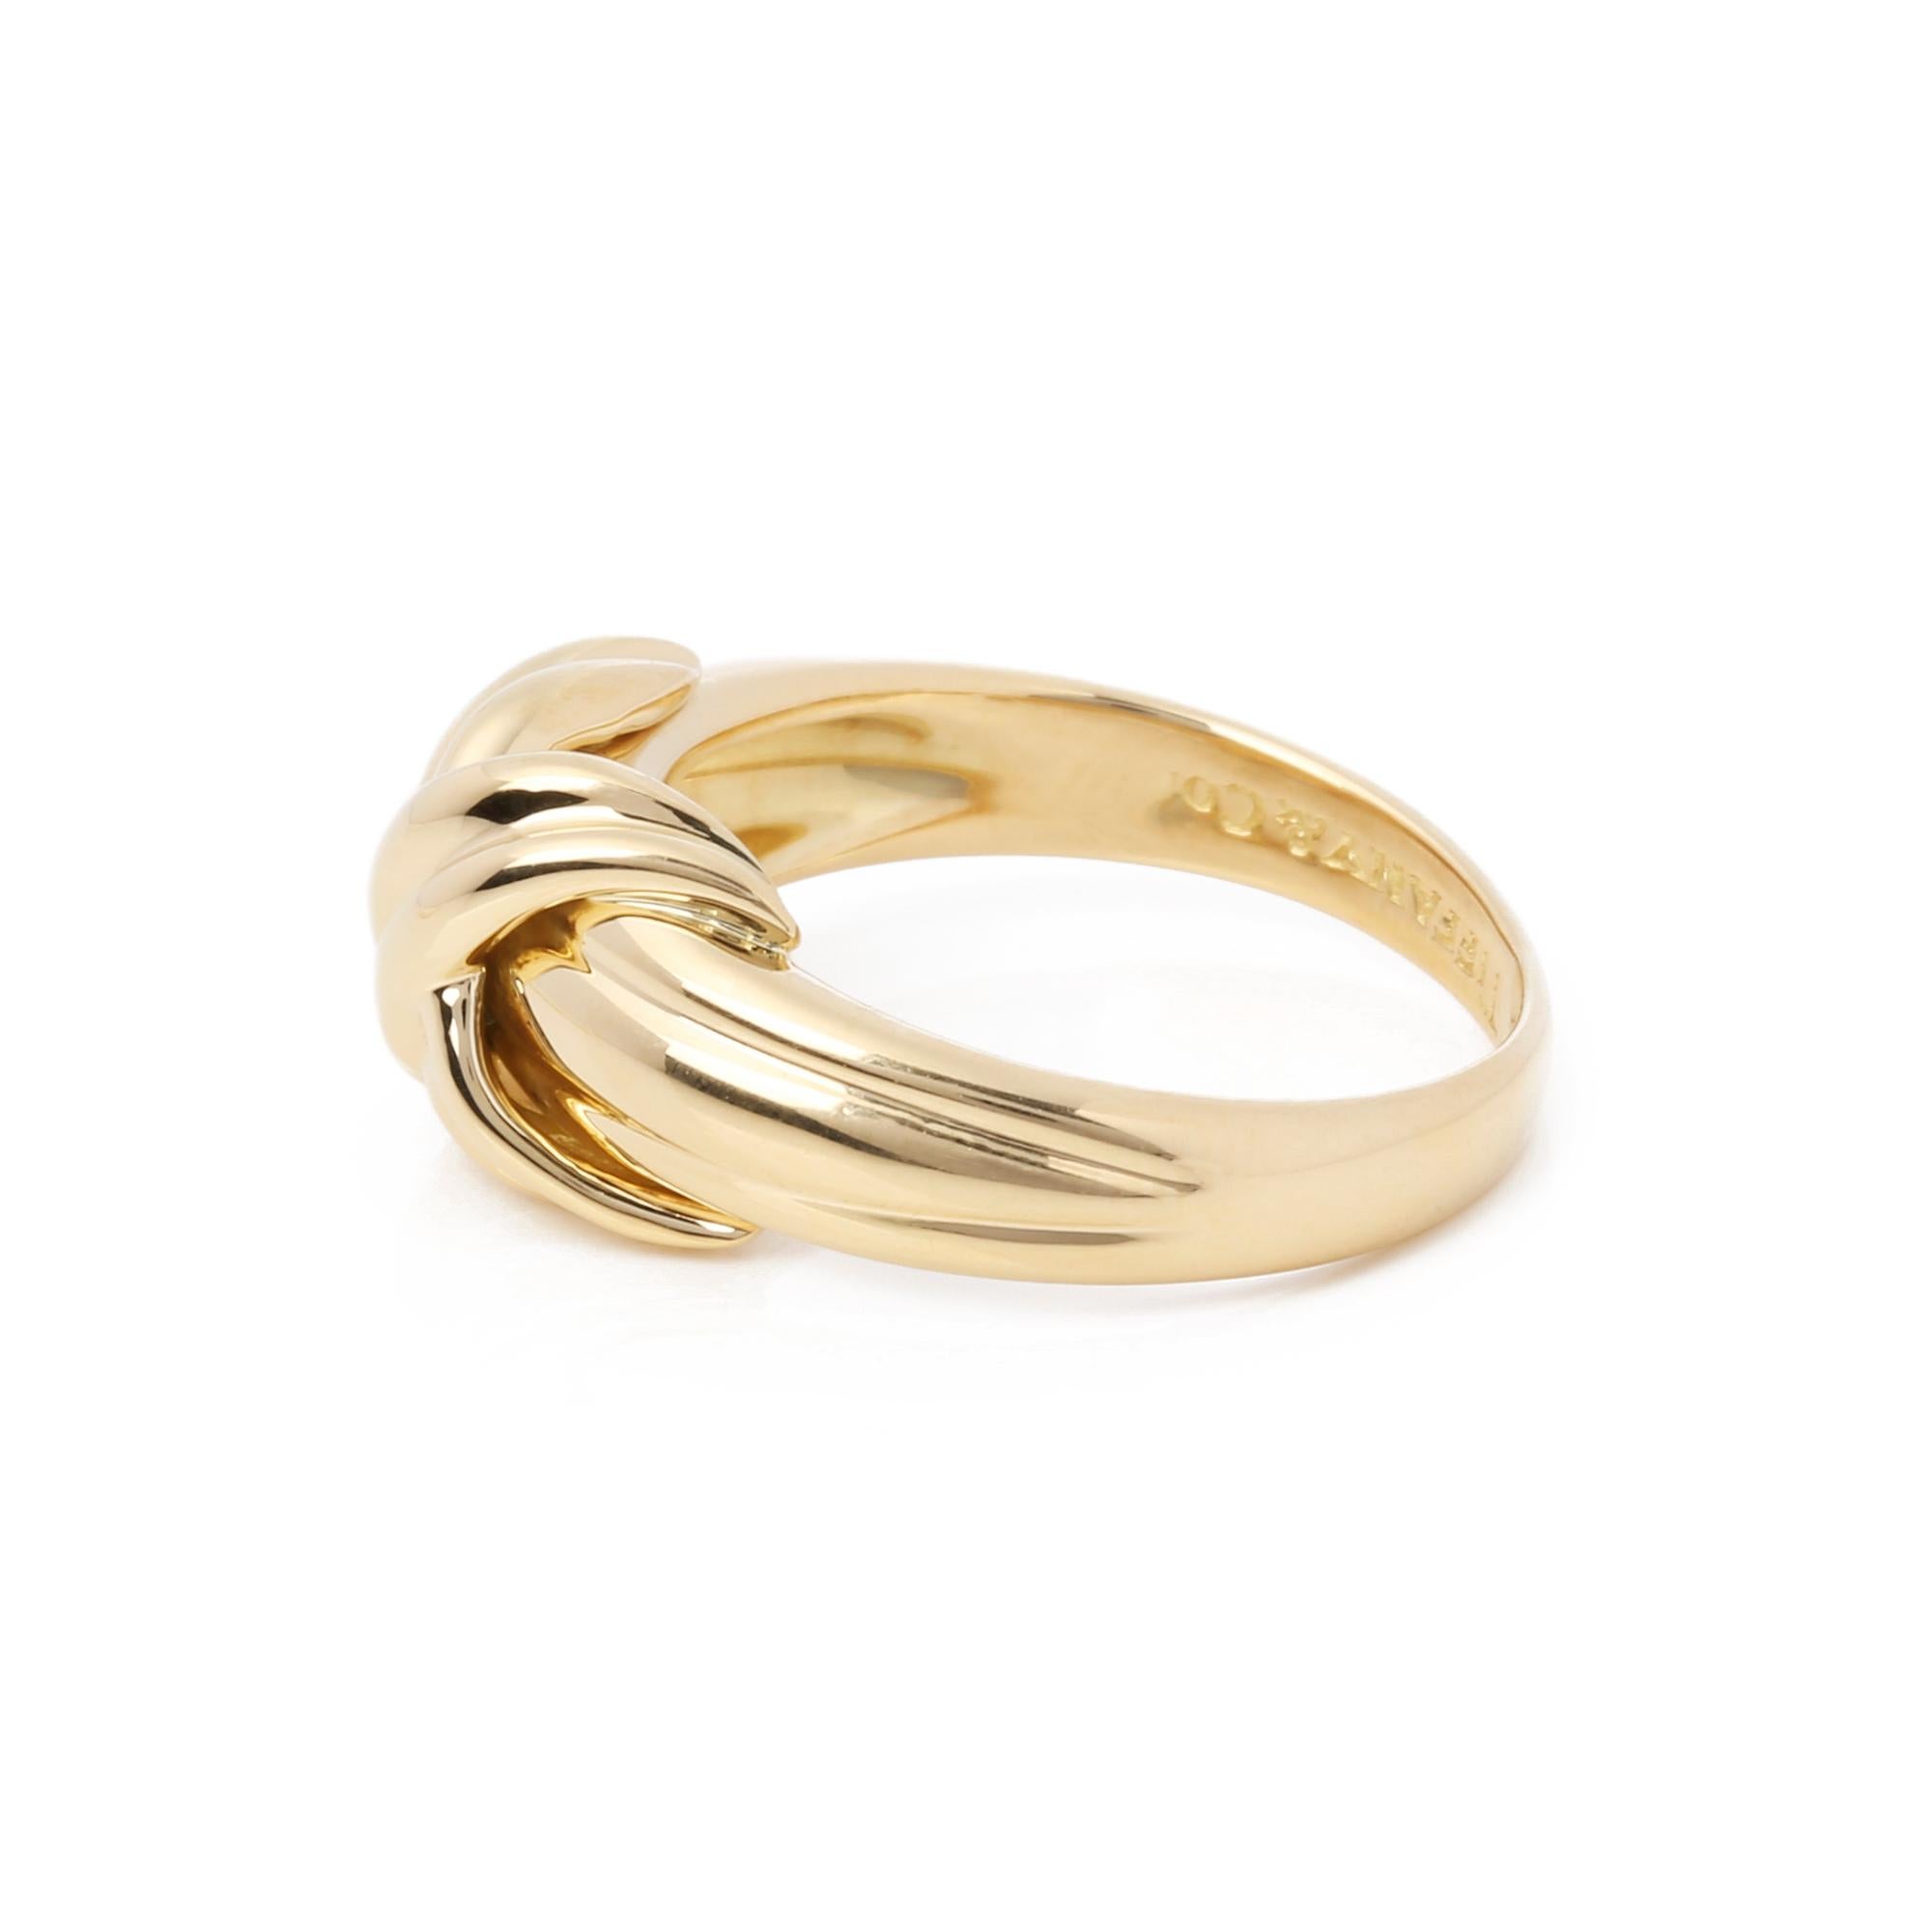 This ring by Tiffany & Co is from their signature X Kiss collection and made in 18k yellow gold. UK ring size K 1/2. EU ring size 51. US ring size 5 1/2. Accompanied with a Xupes presentation box. Our Xupes reference is J705 should you need to quote